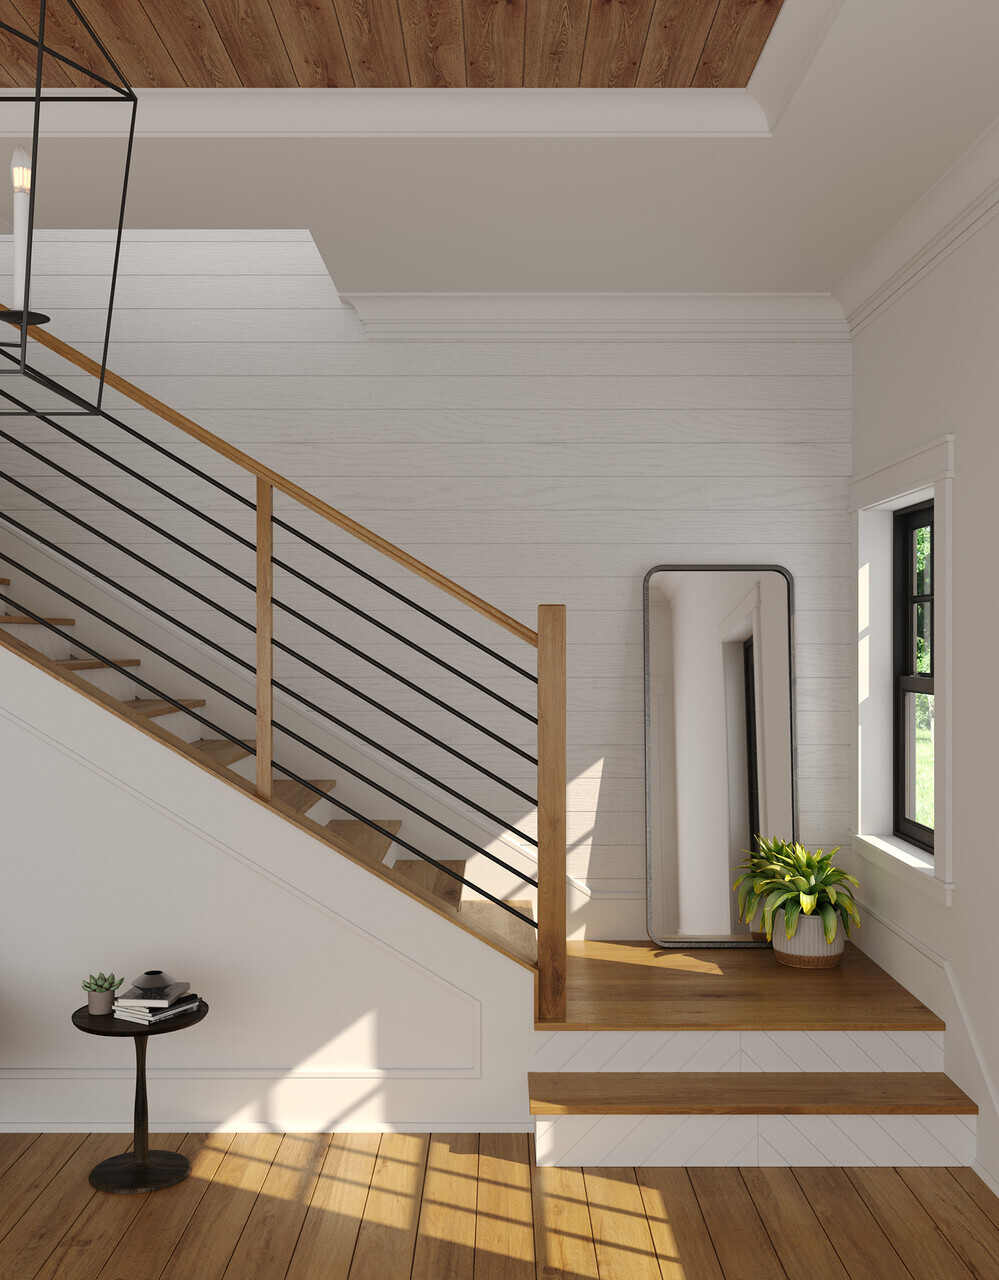 684C - Linear Style Handrail - Non-Plowed